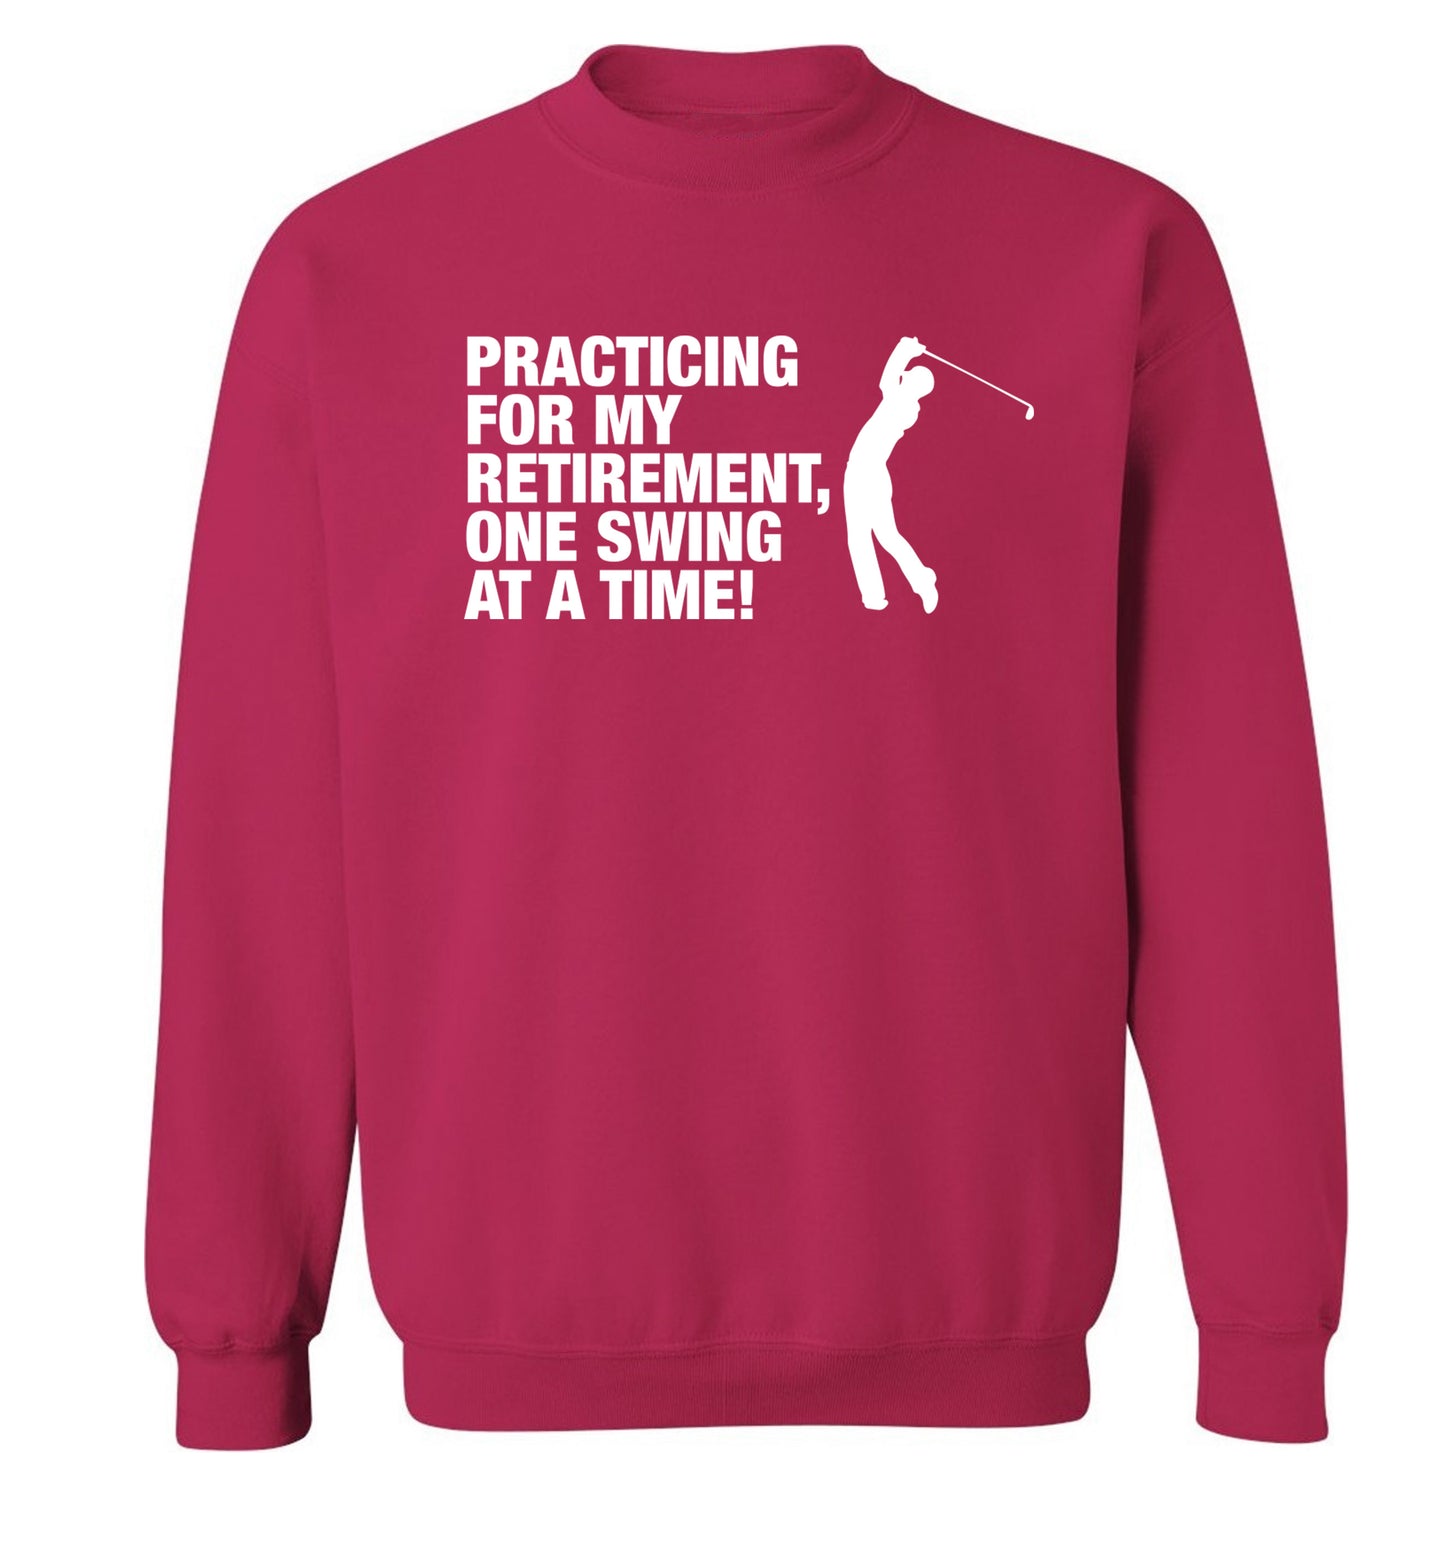 Practicing for my retirement one swing at a time Adult's unisex pink Sweater 2XL